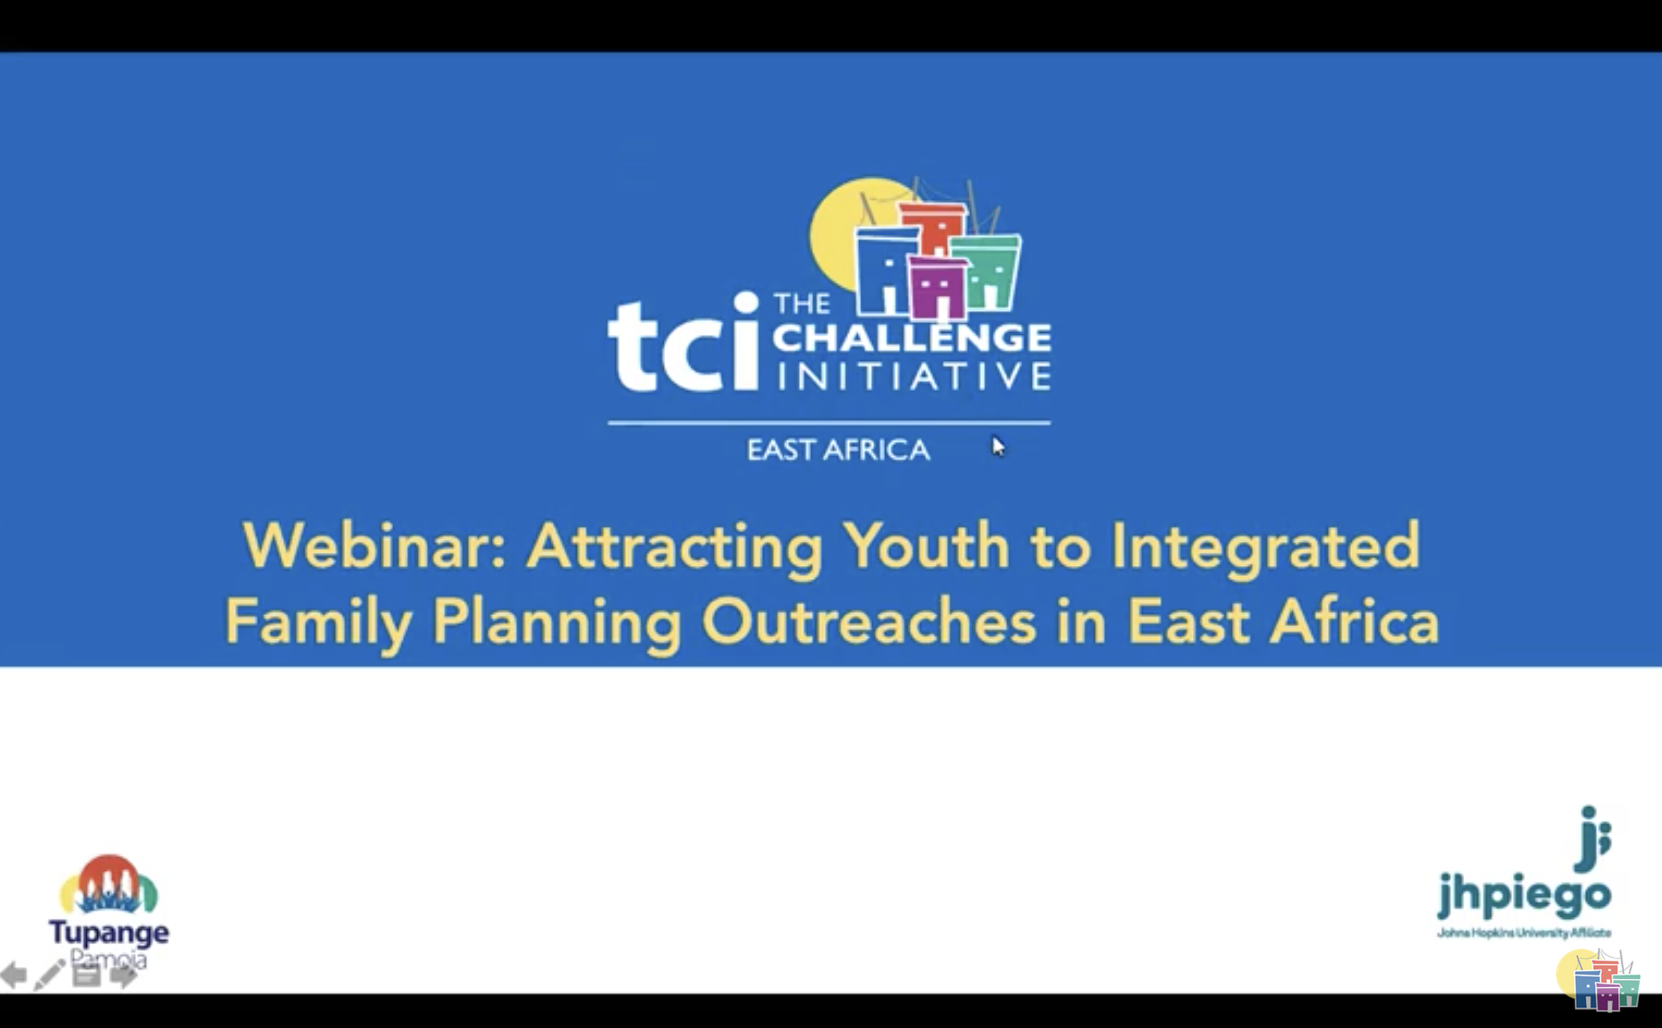 Webinar: Attracting Youth to Integrated Family Planning Outreaches in East Africa